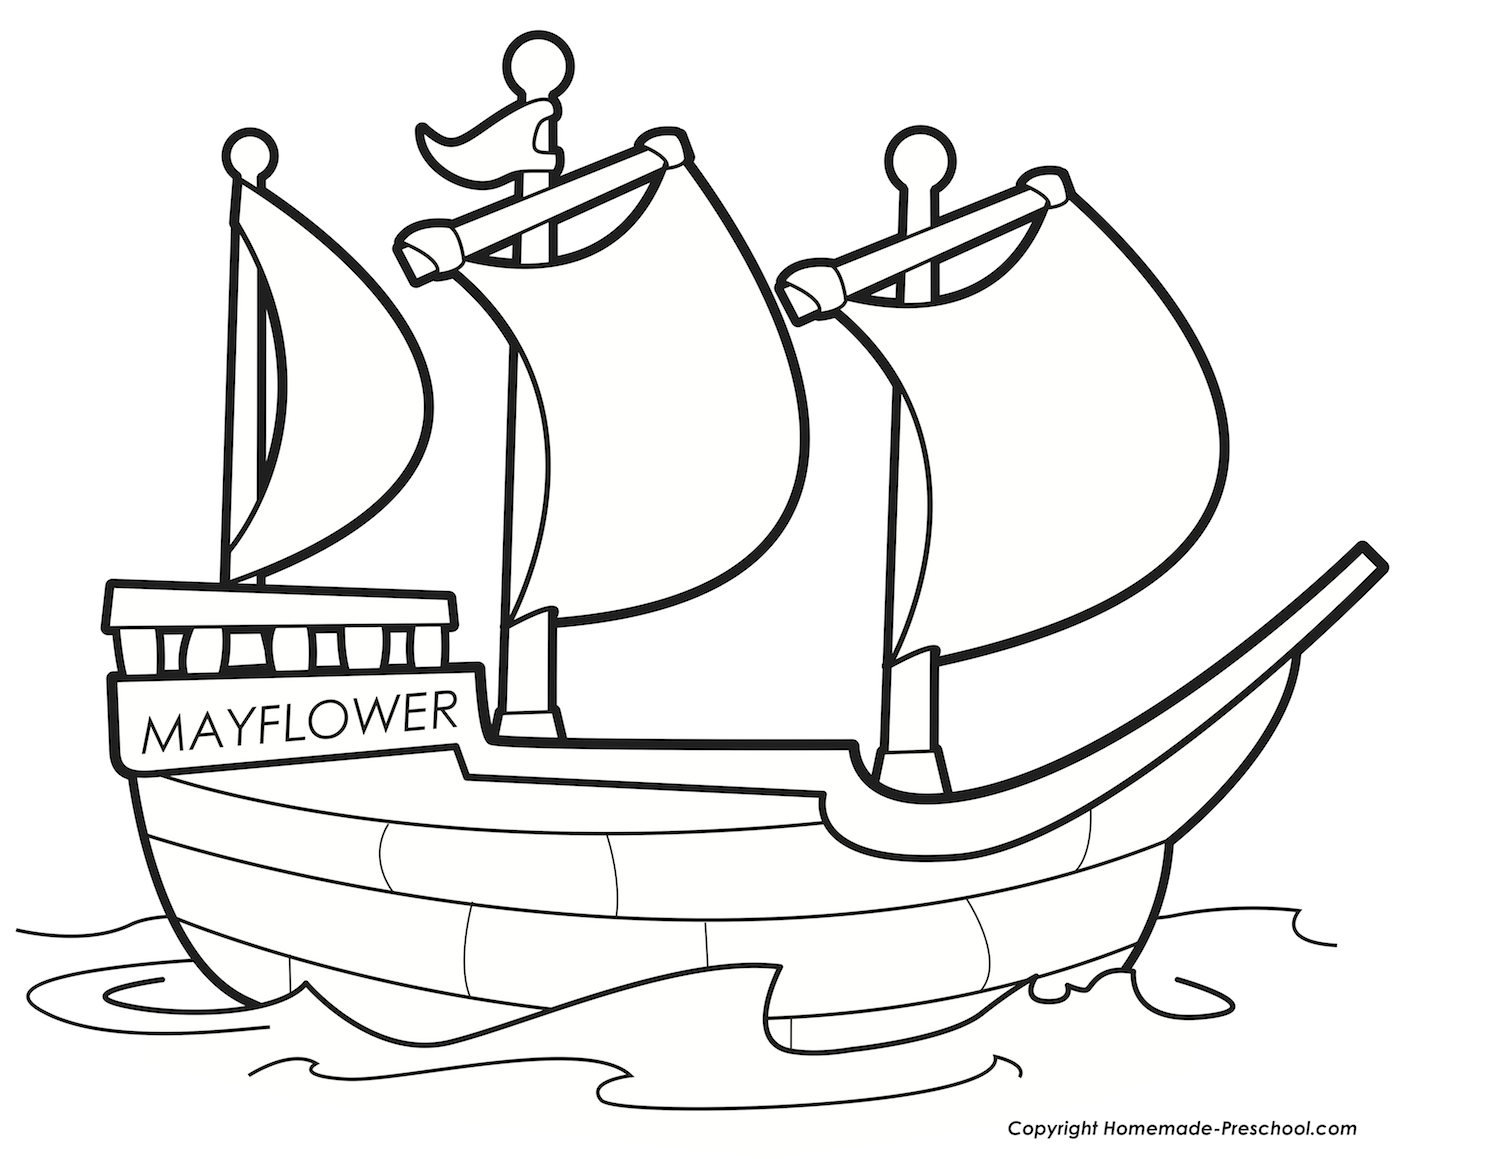 Free Thanksgiving Mayflower Coloring Pages at KidsPartyWorks.Com